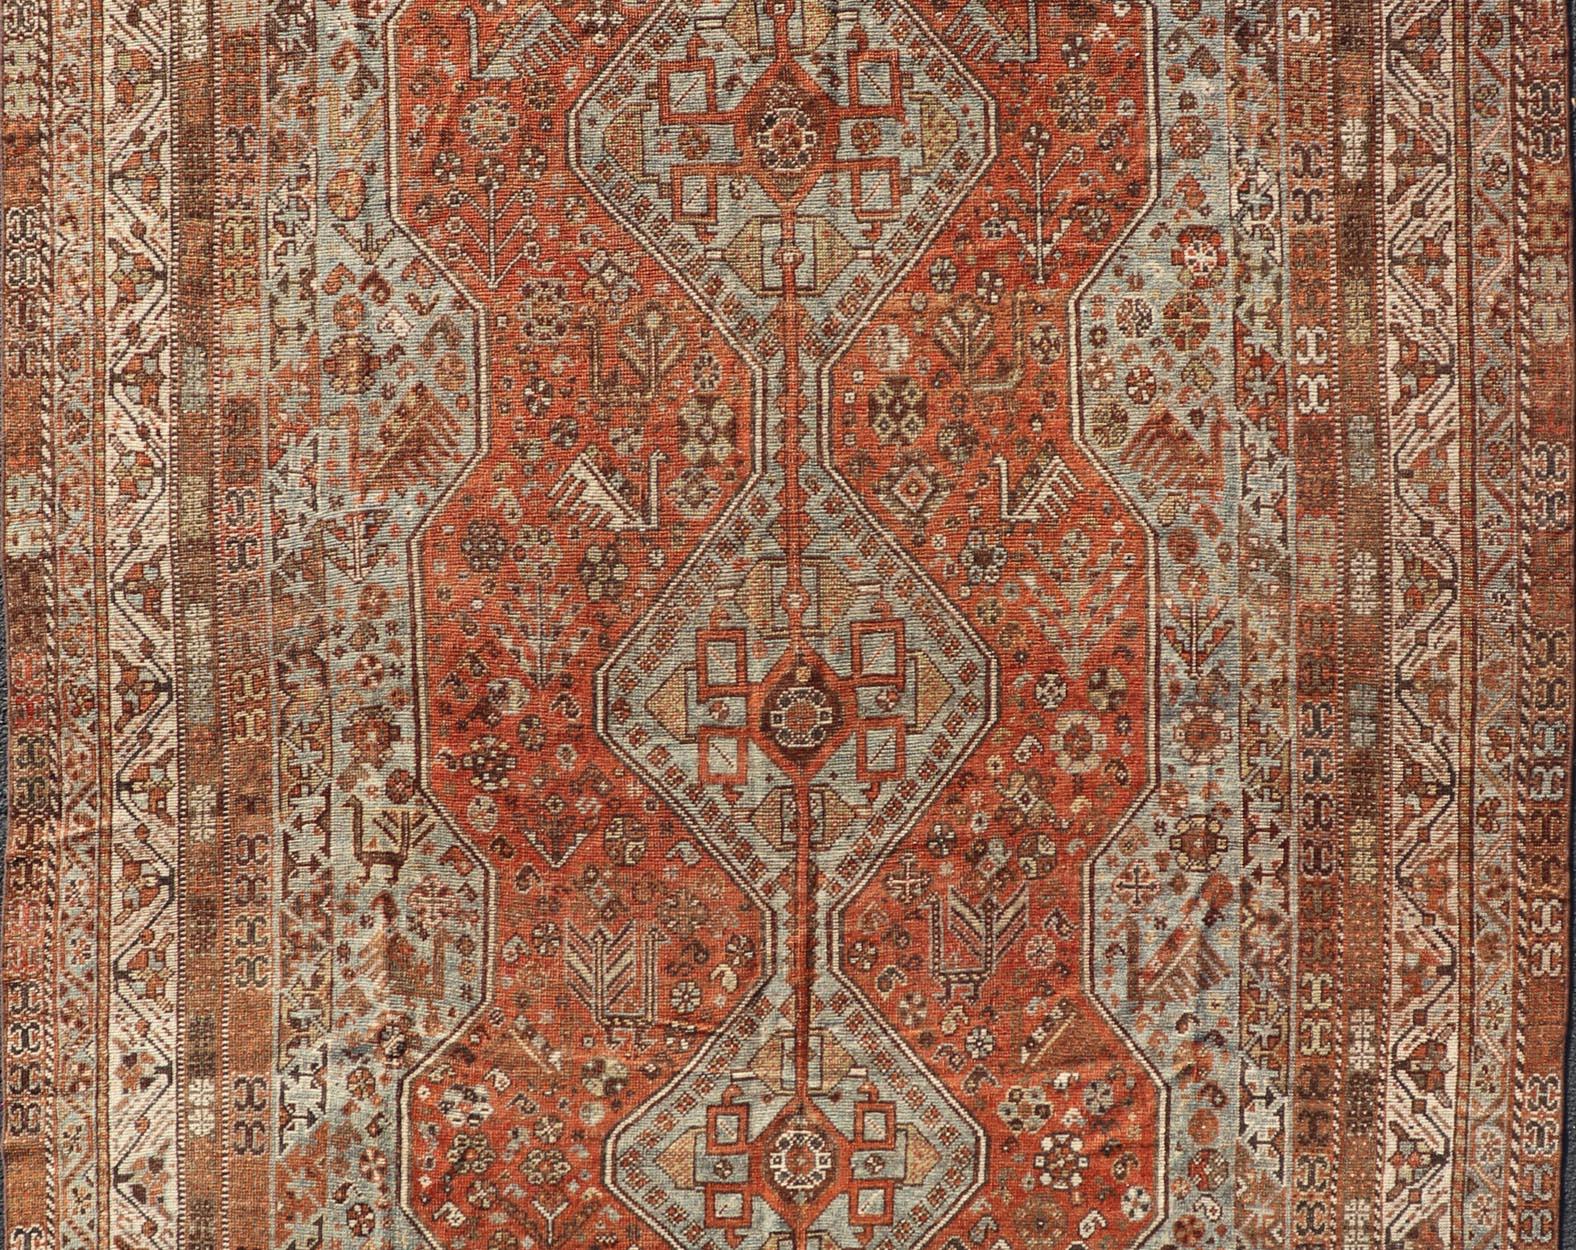 20th Century Antique Persian Shiraz Rug With Medallions Geometric in Rusty Orange, Steel Blue For Sale